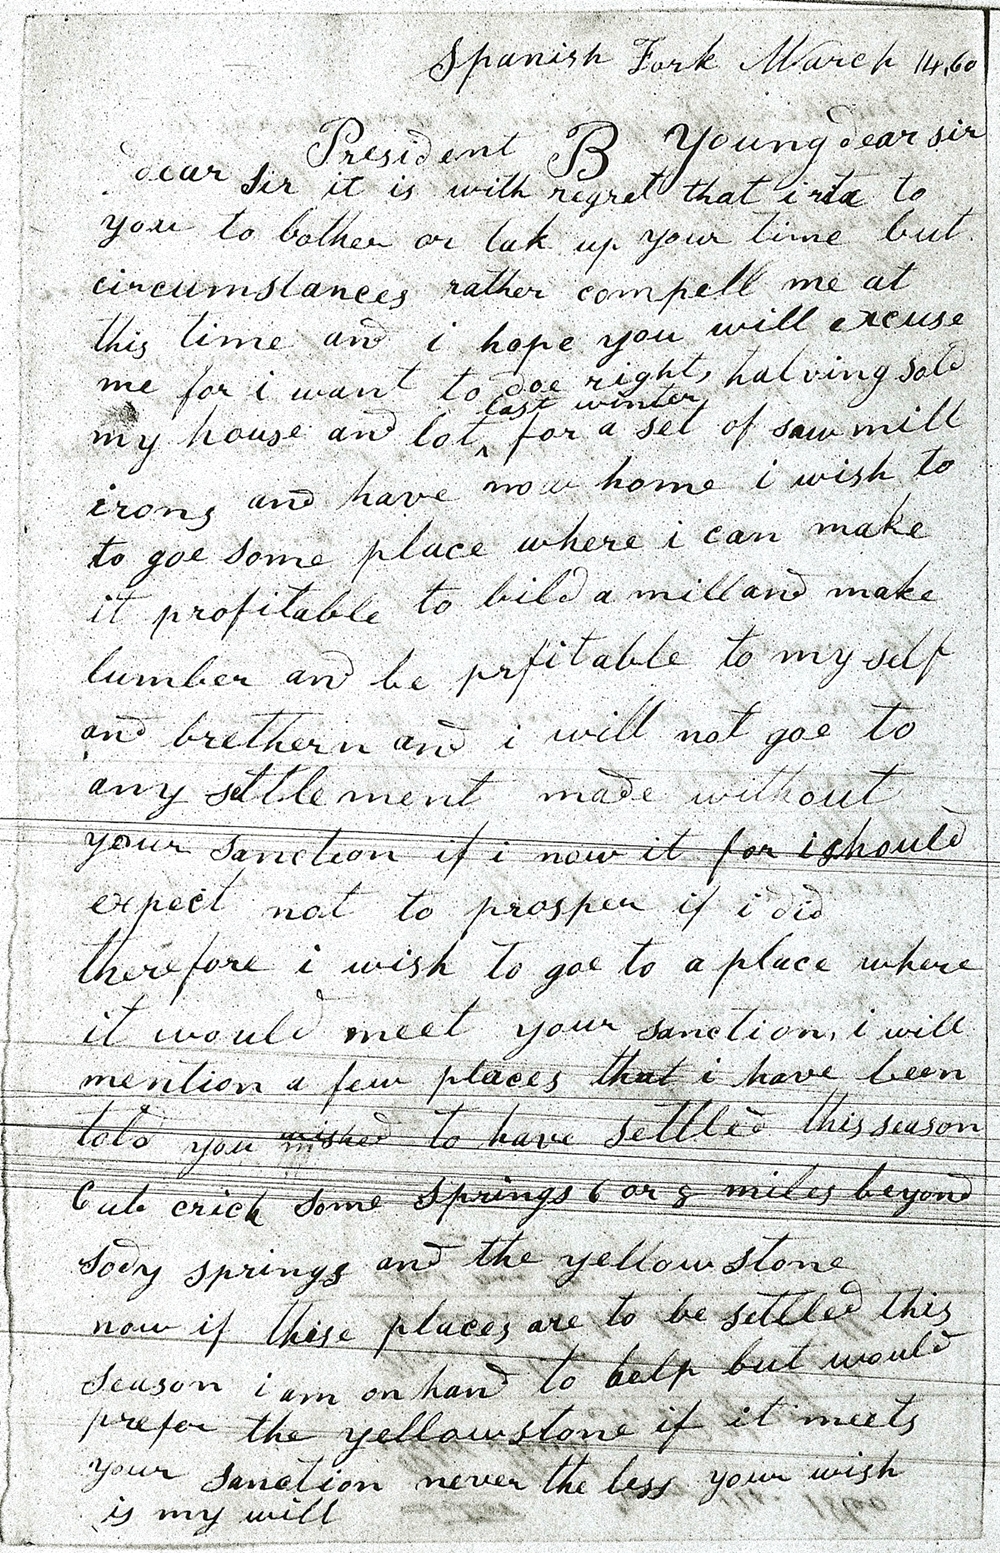 Peter Shirts Letter to Brigham Young requesting relocation of Spanish Fork saw mill